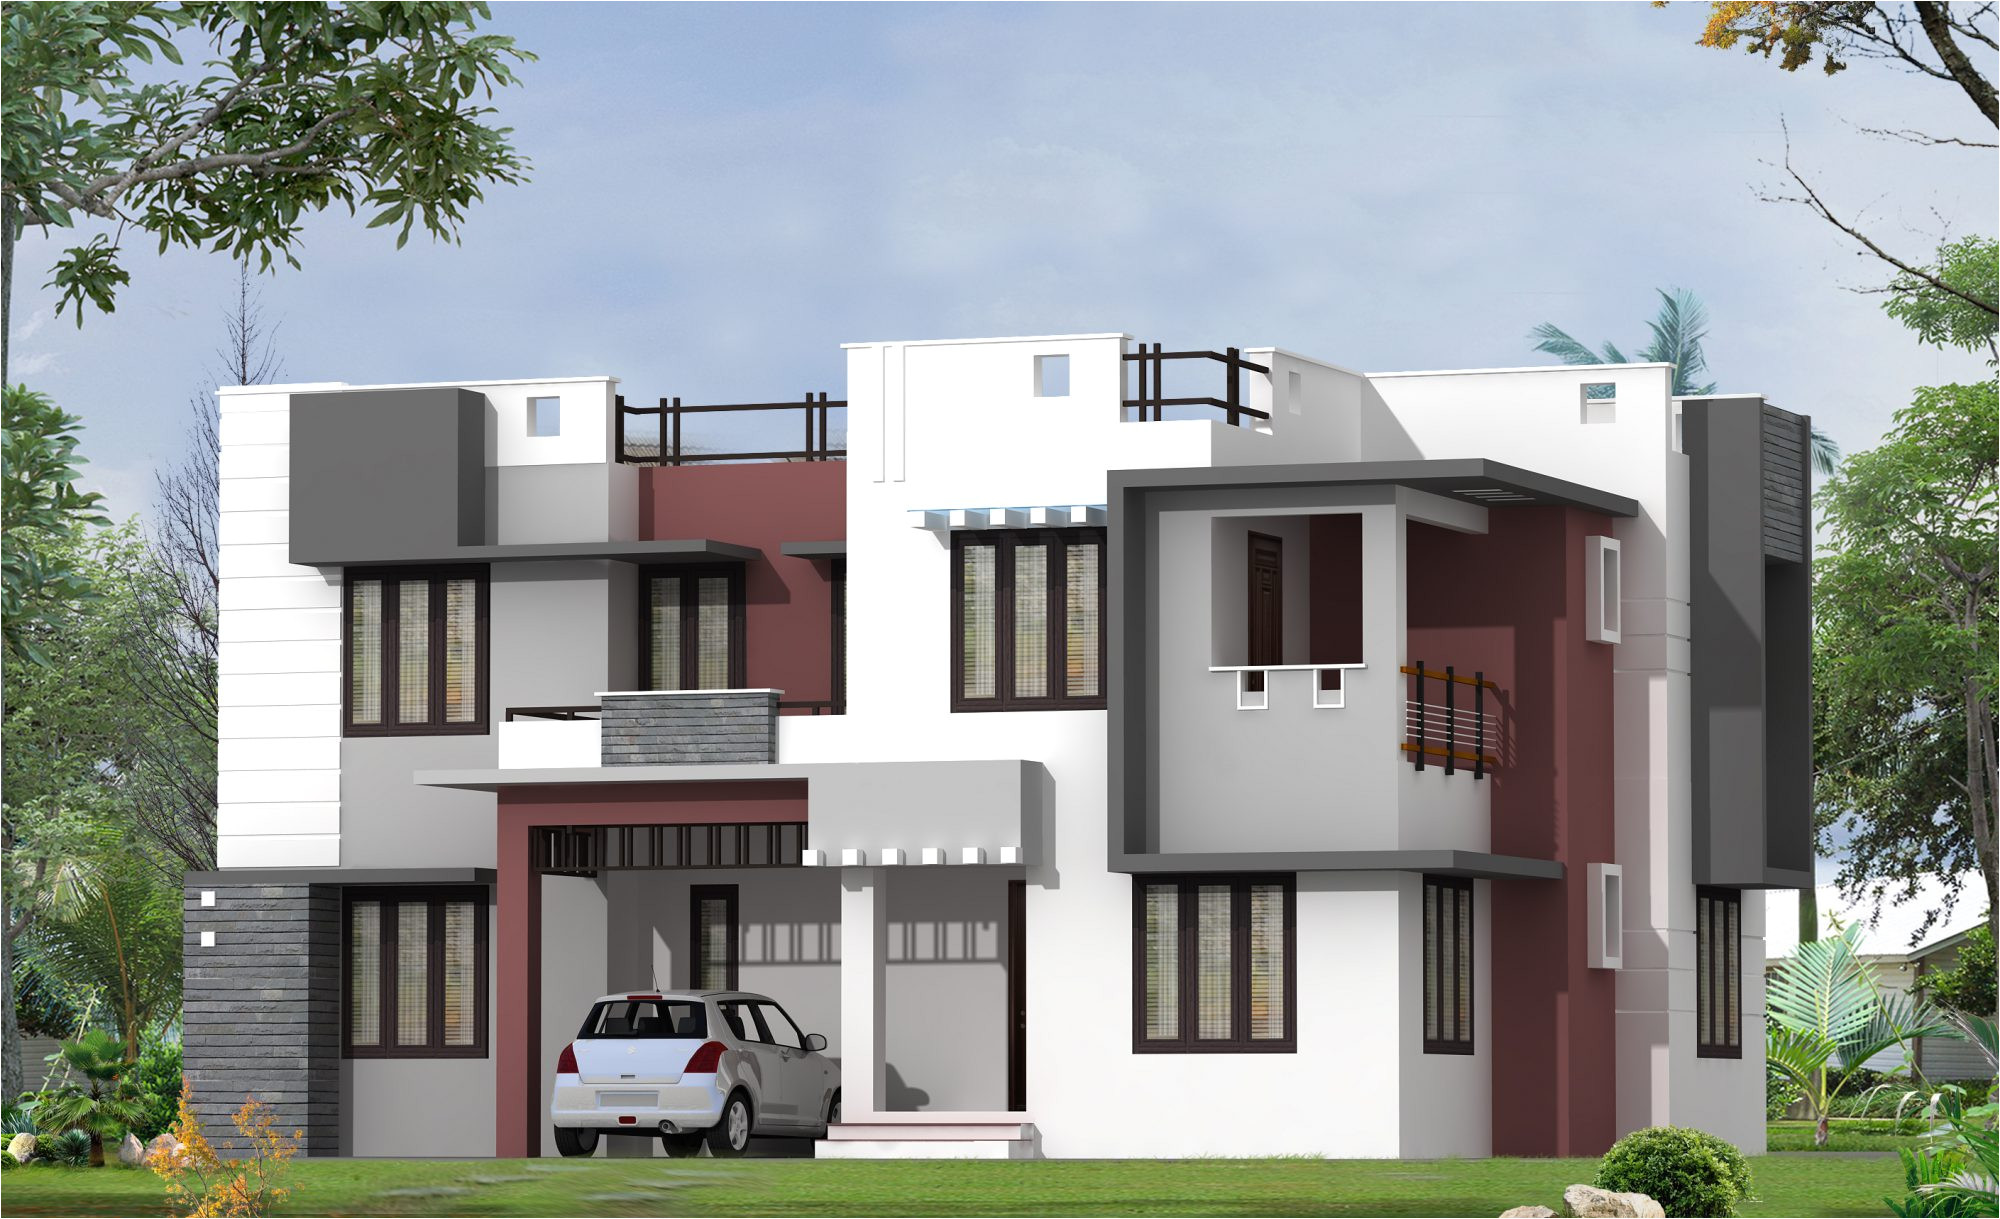 Home Elevation Plans House Front Elevation Design for Double Floor theydesign